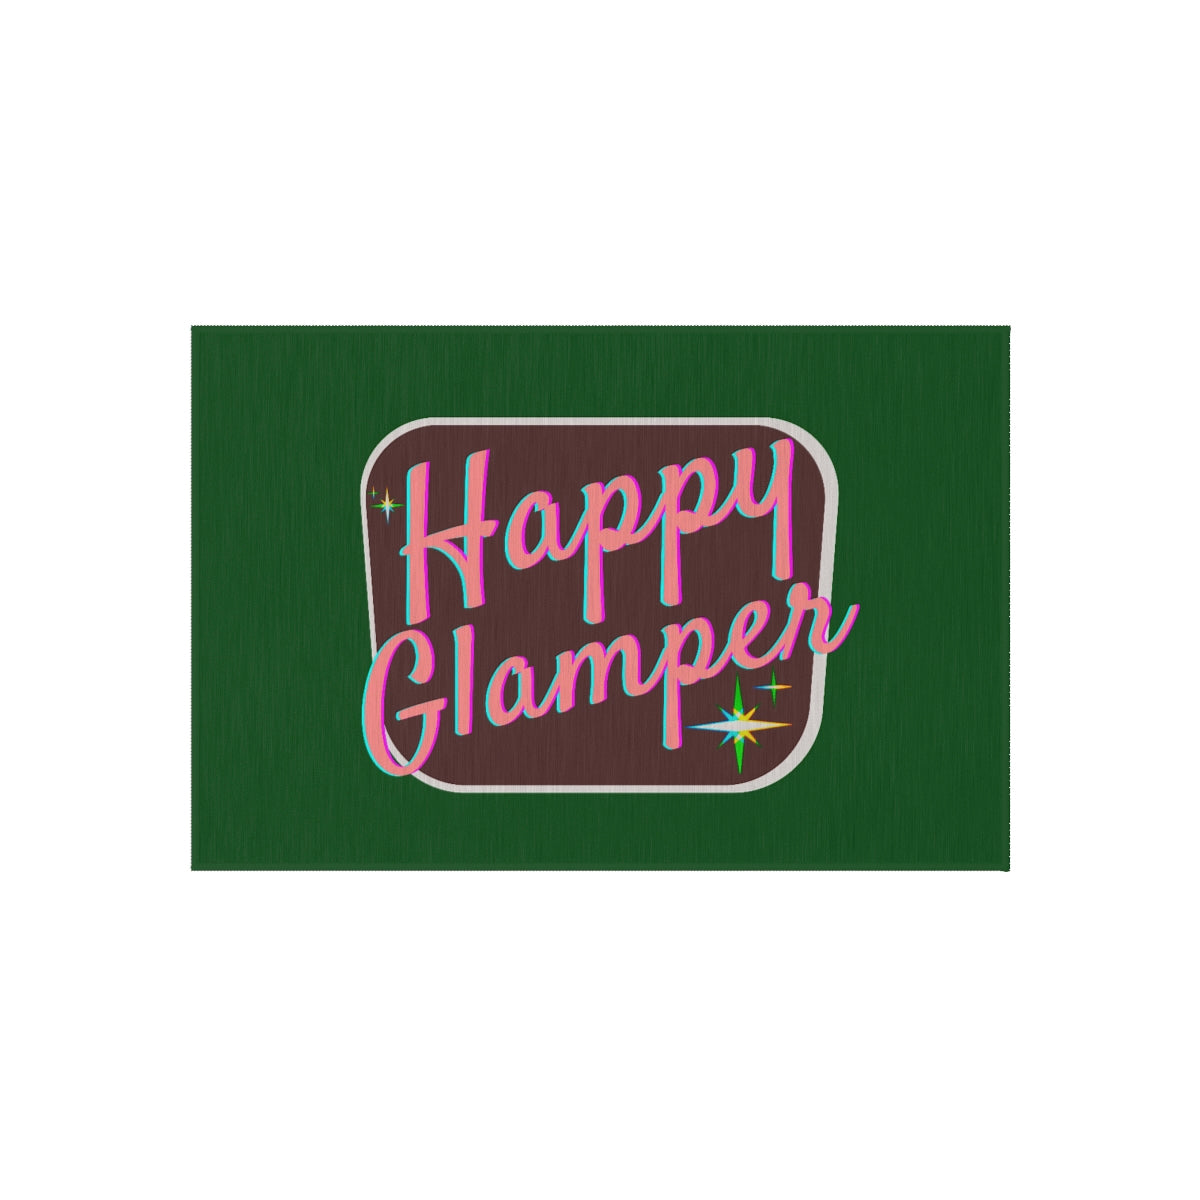 Vintage-Inspired Happy Glamping Rug for Your Camper Van, Tent, or RV